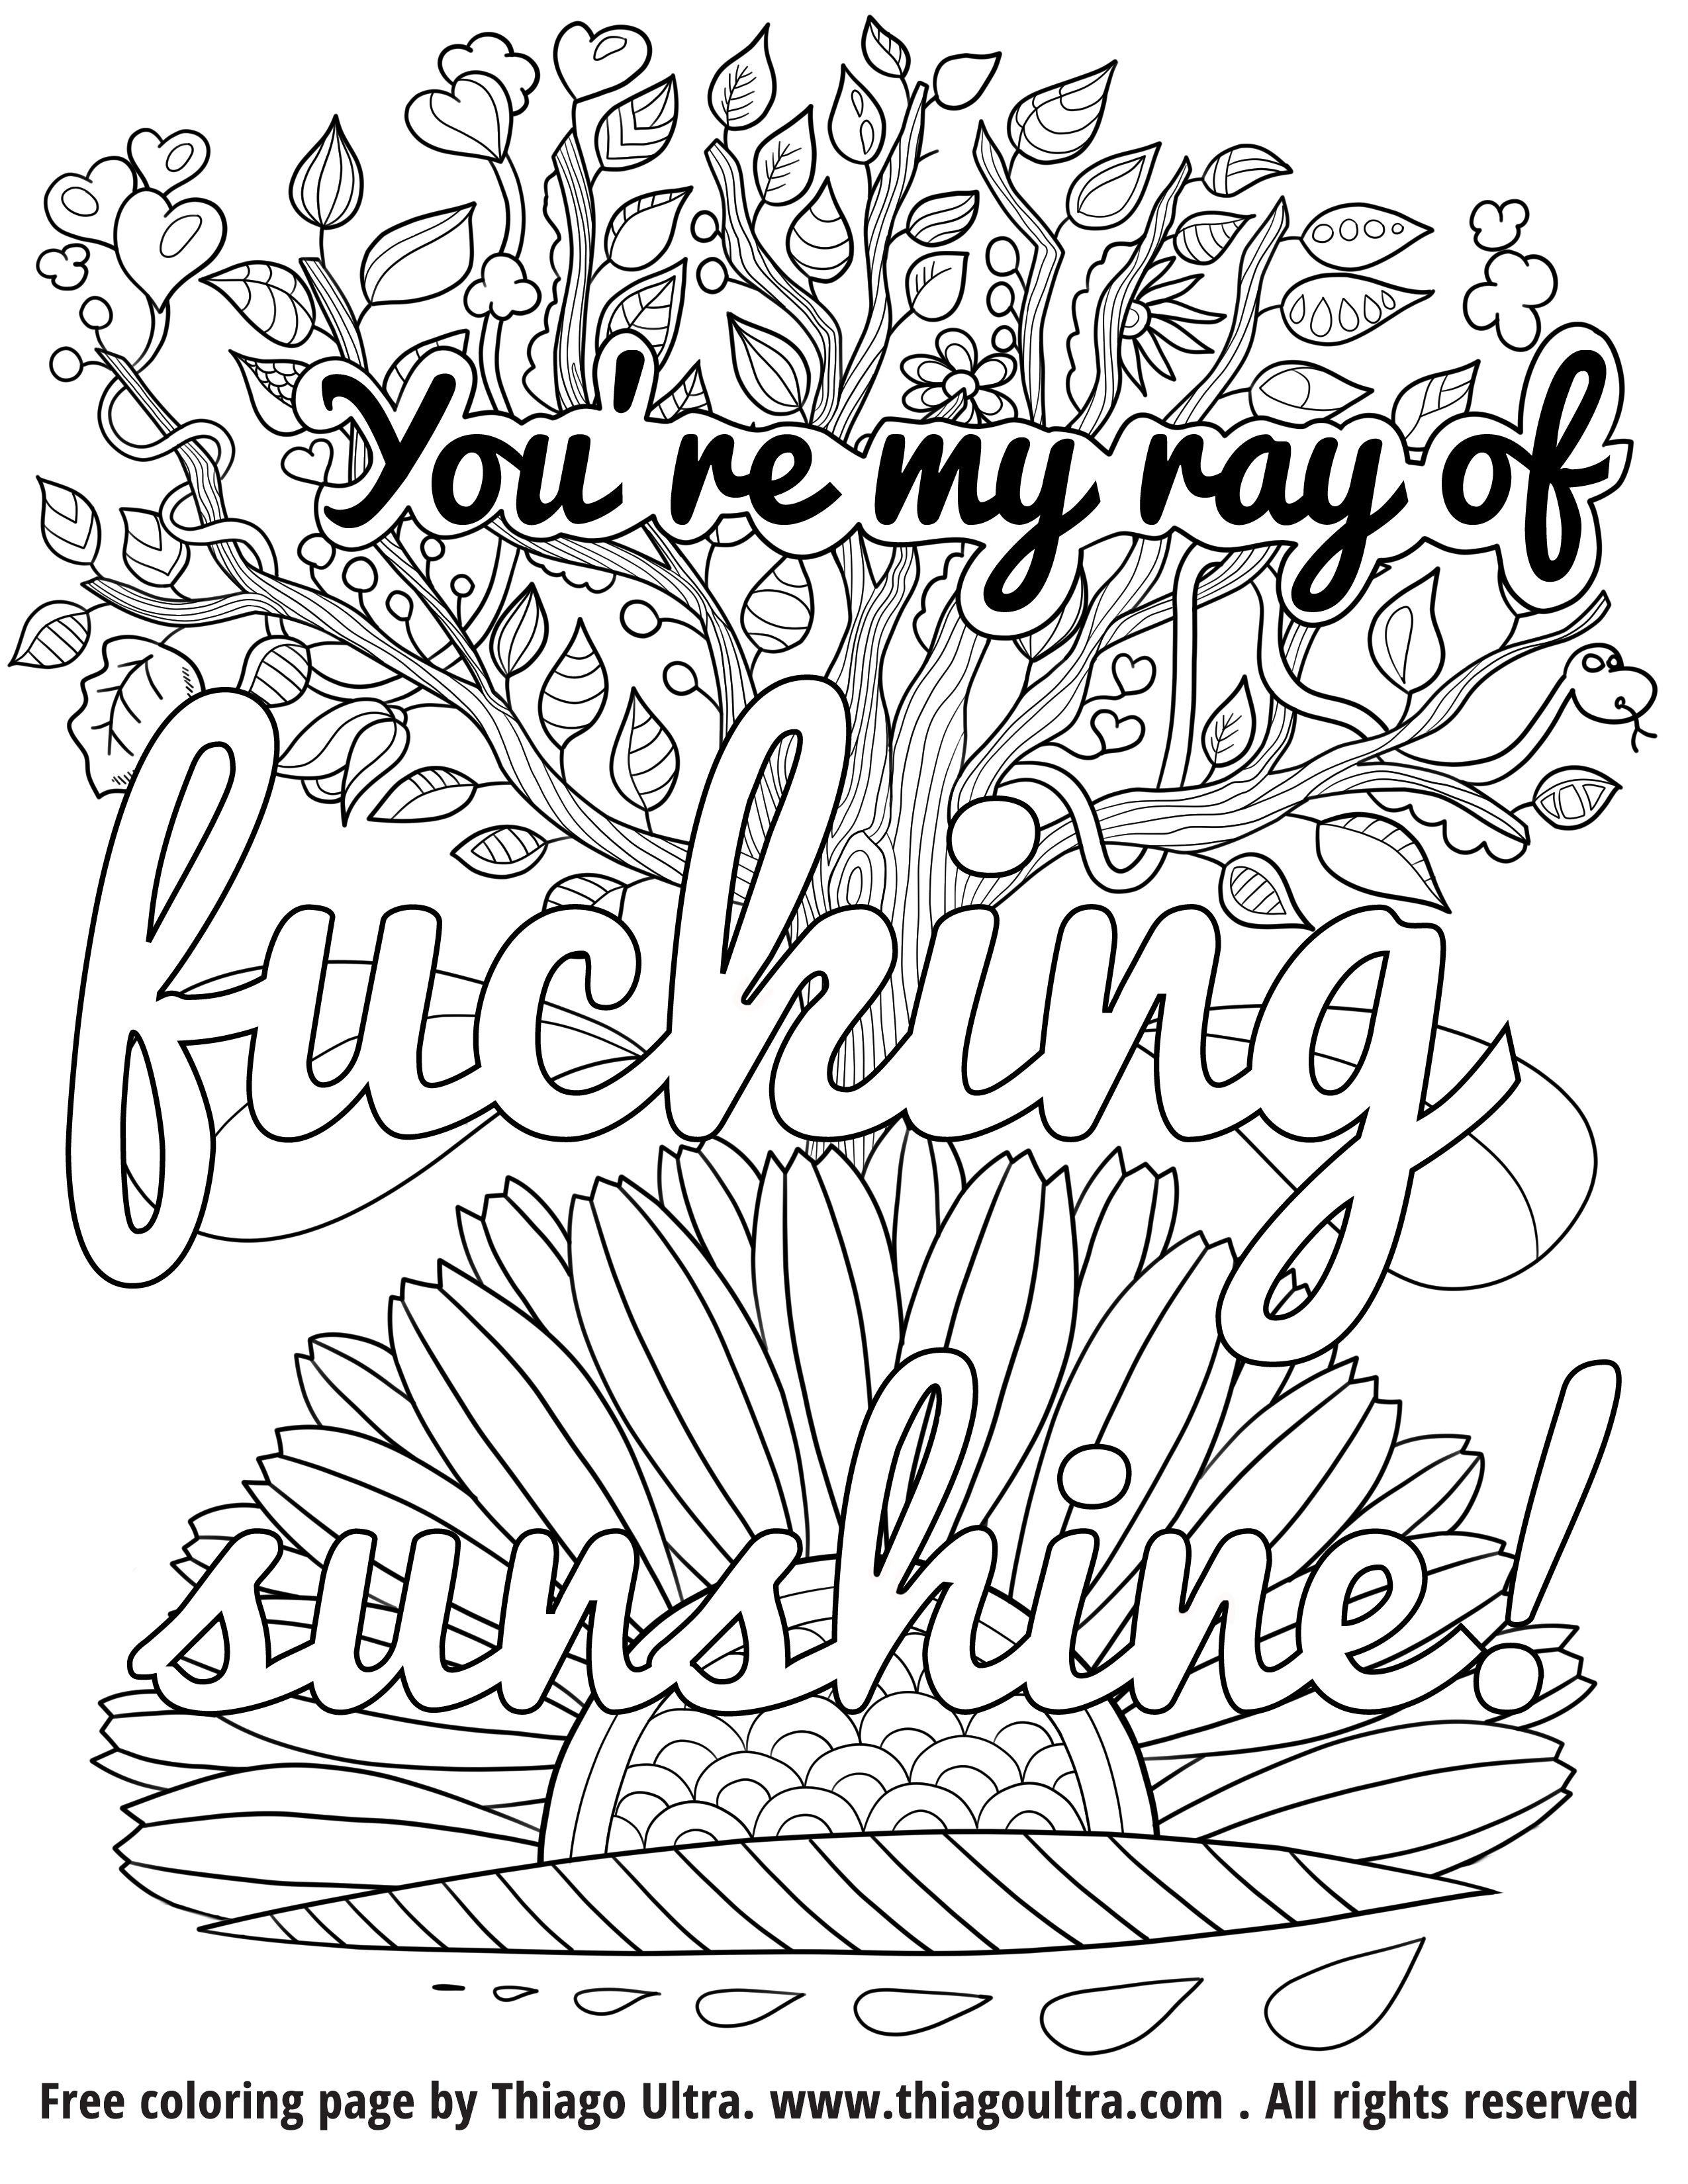 Coloring Ideas : 1840D37706A73E0C394A077851E5964E_Focus Free - Free Printable Coloring Pages For Adults Only